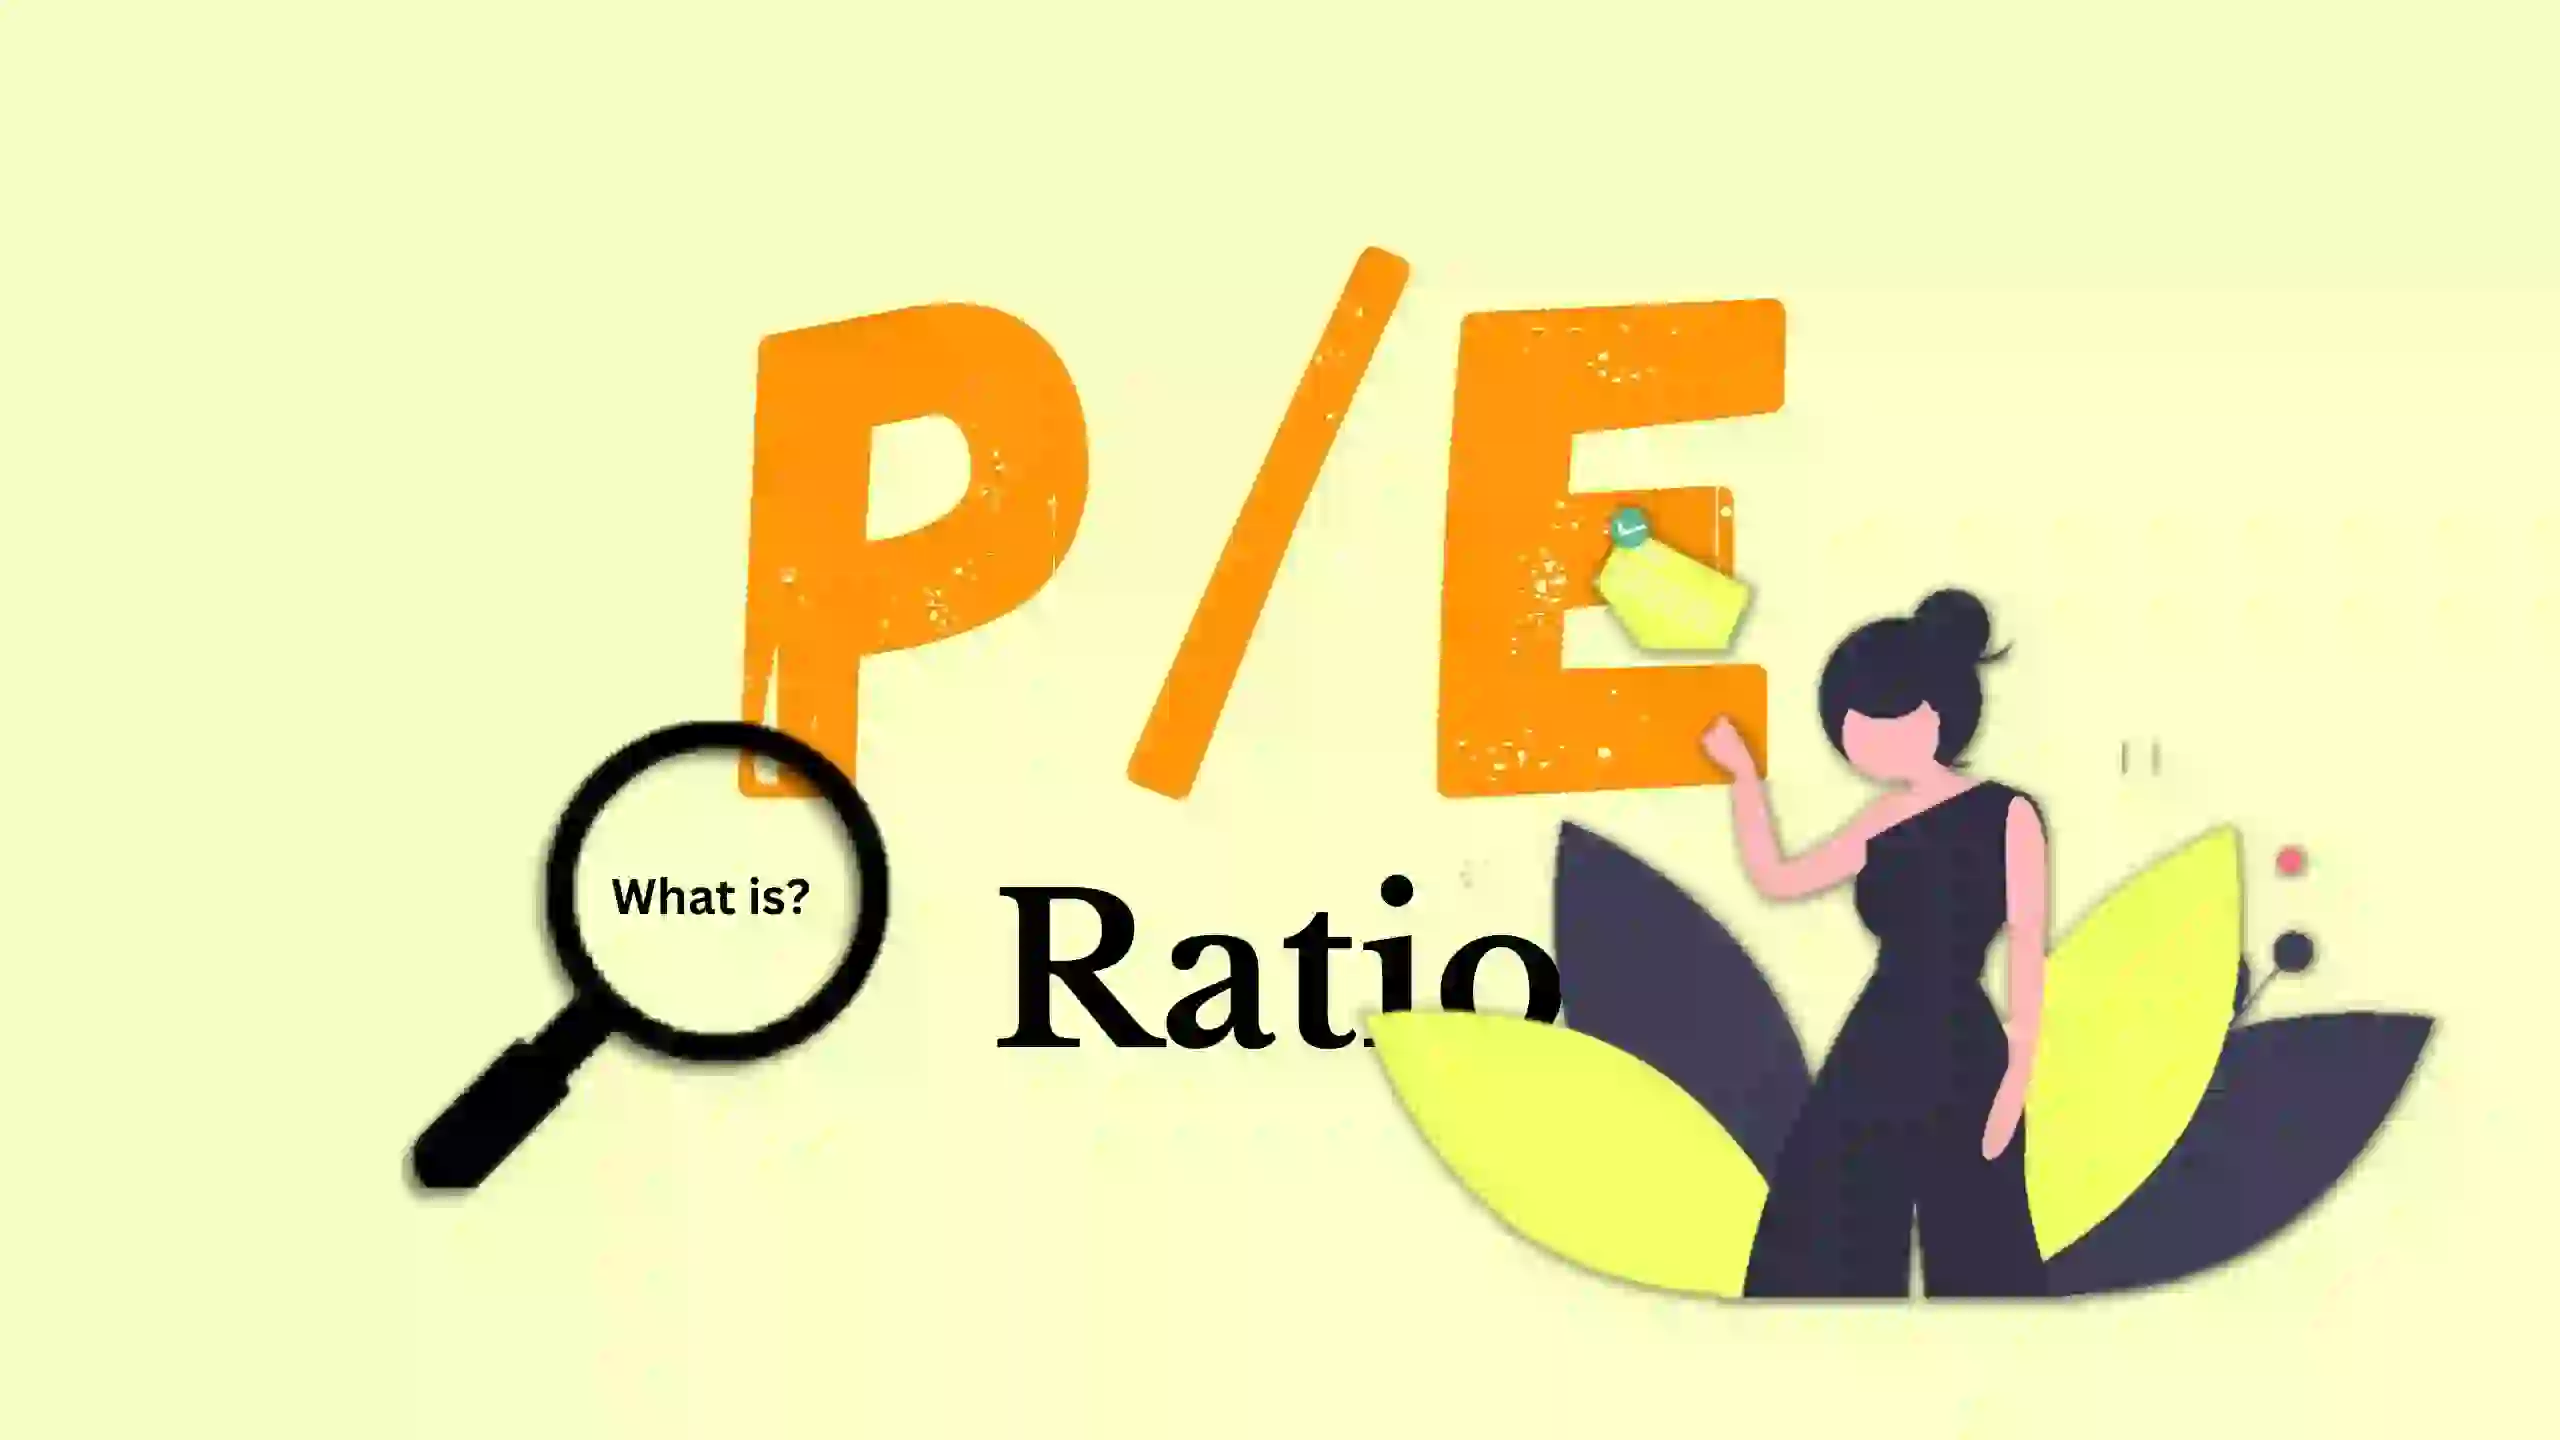 What is PE Ratio